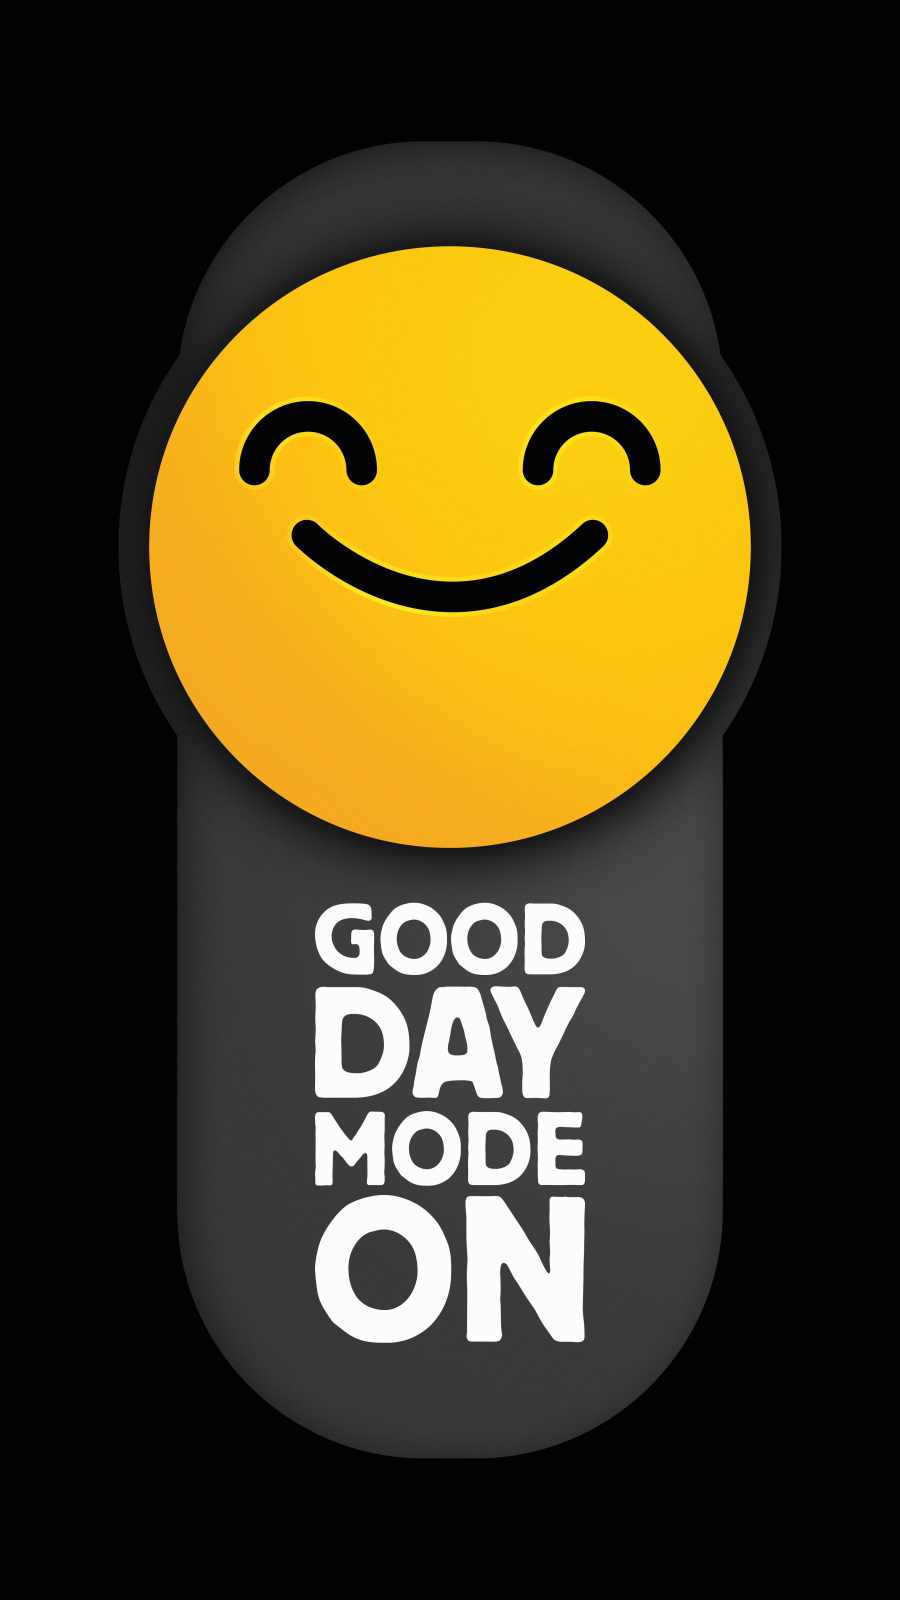 Good Day Mode ON iPhone Wallpaper